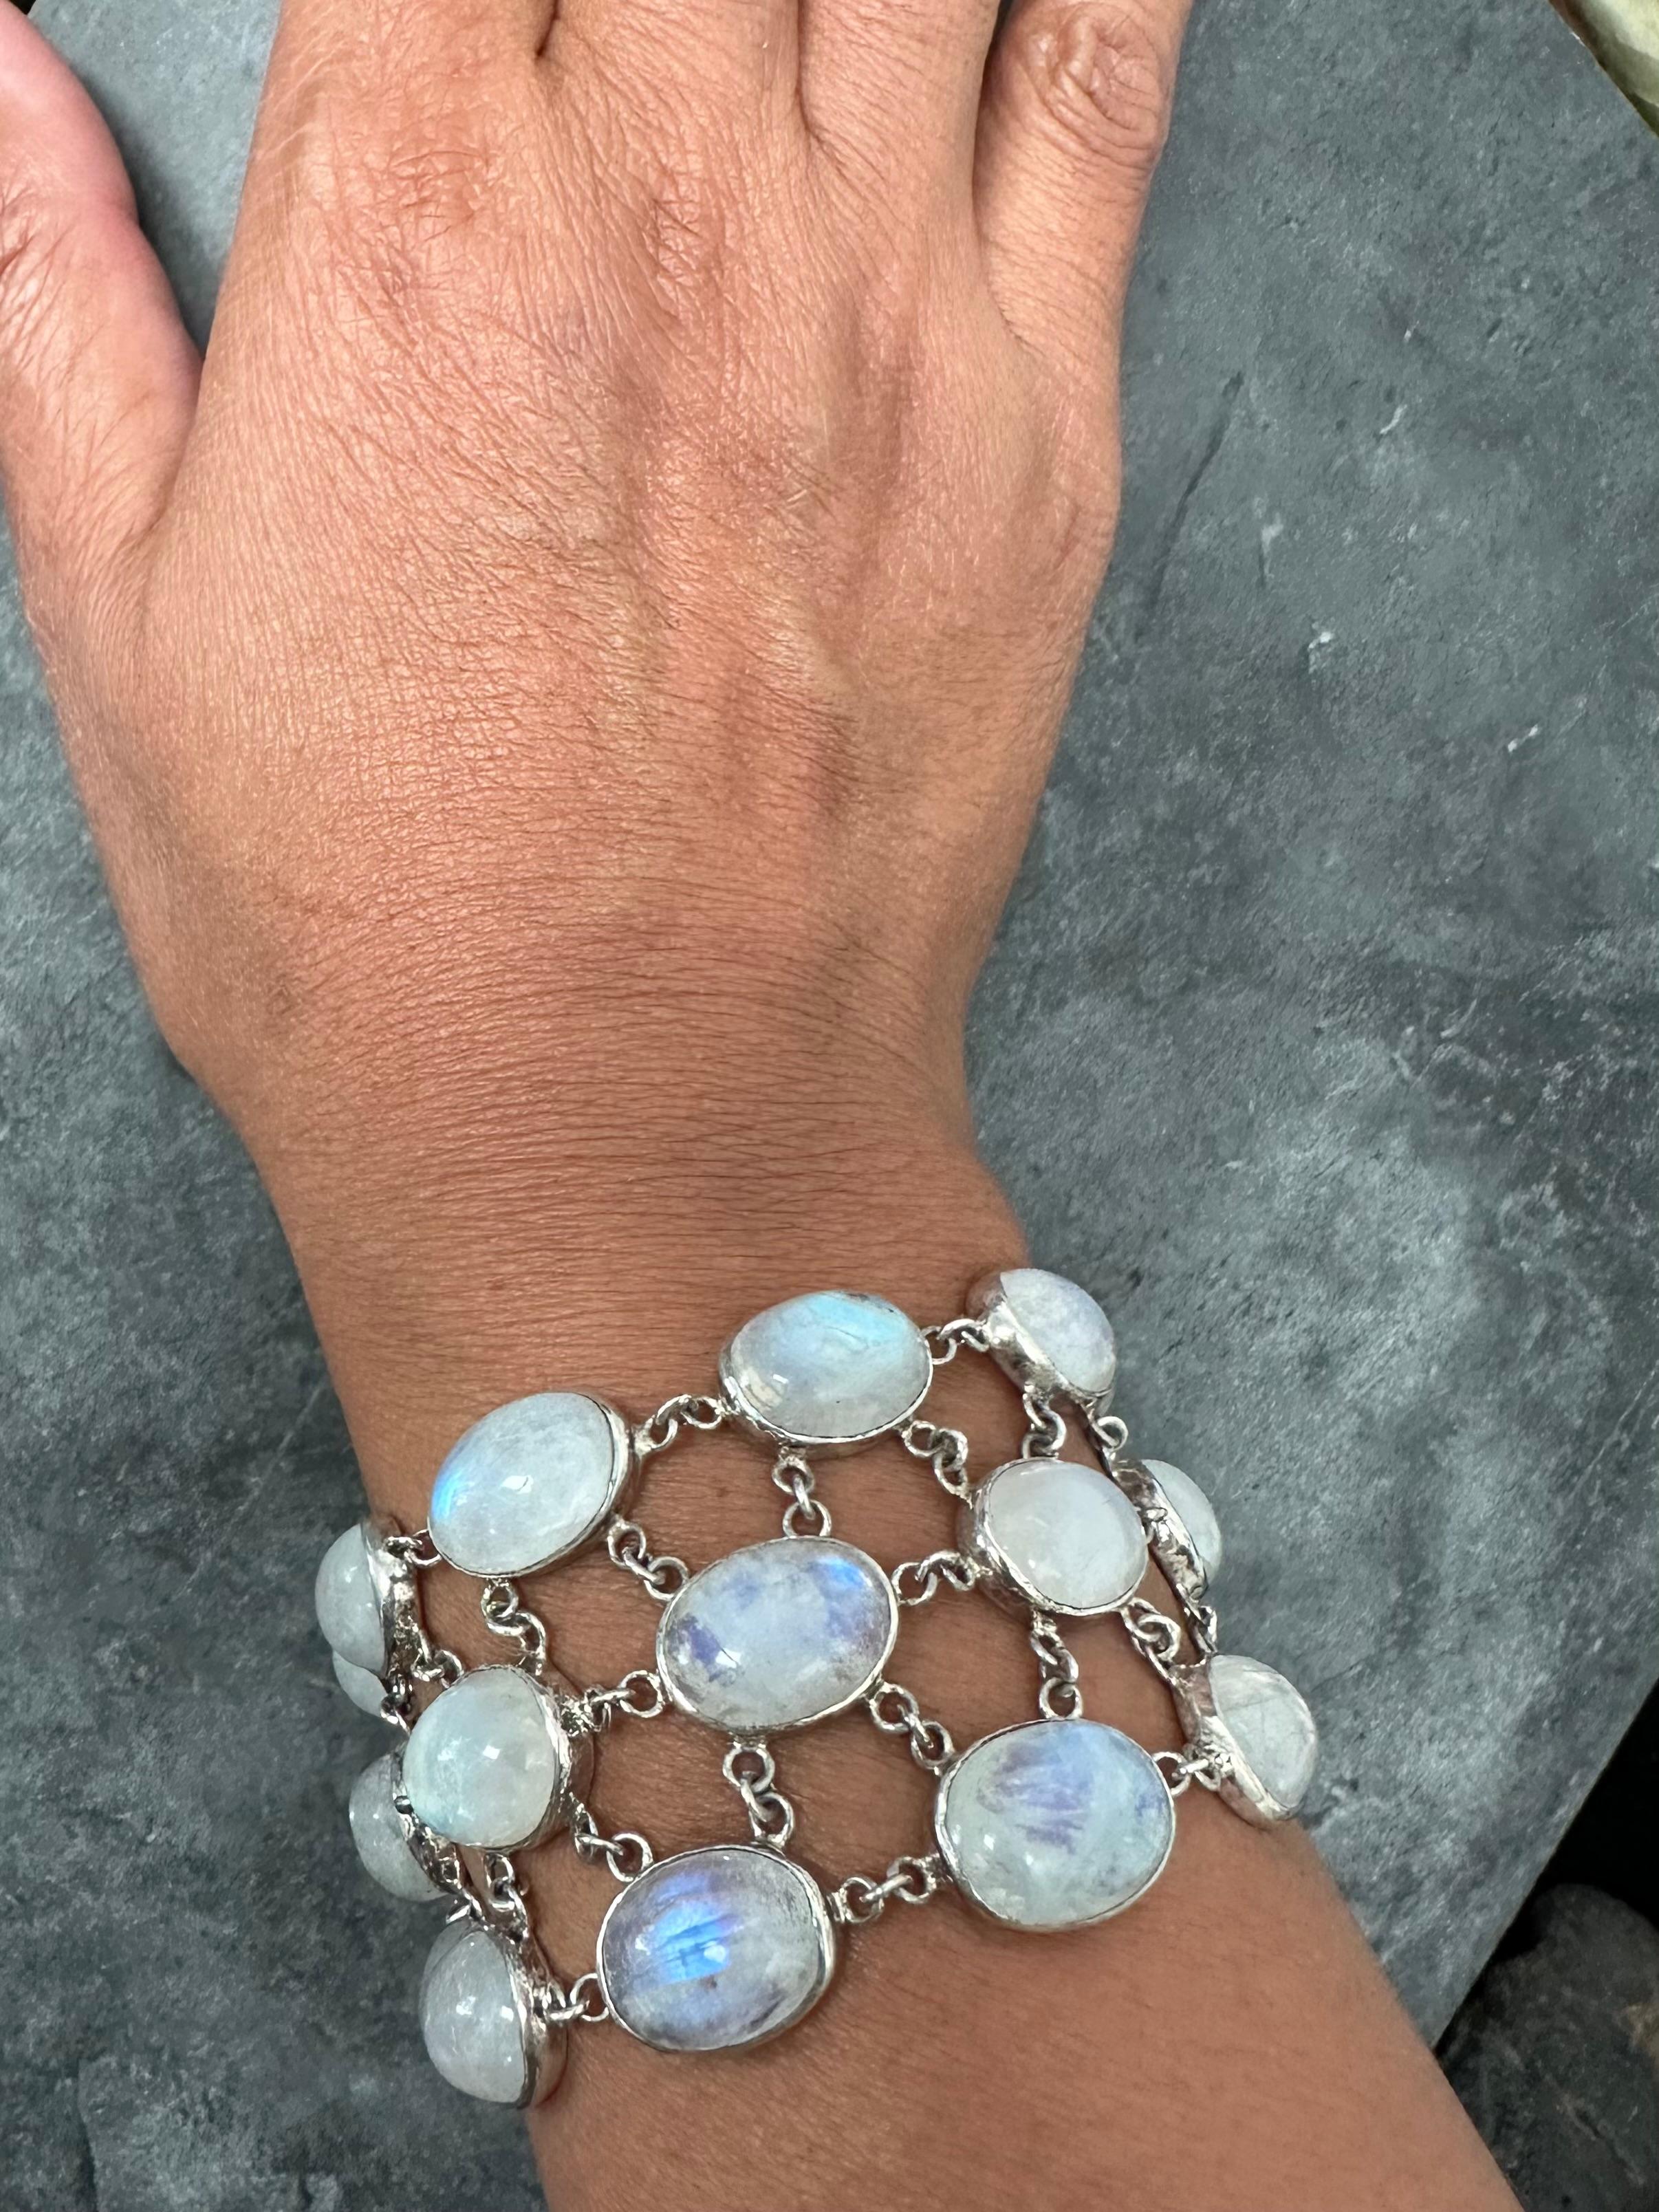 Steven Battelle 120.0 Carats Rainbow Moonstone Sterling Silver Bracelet  In New Condition For Sale In Soquel, CA